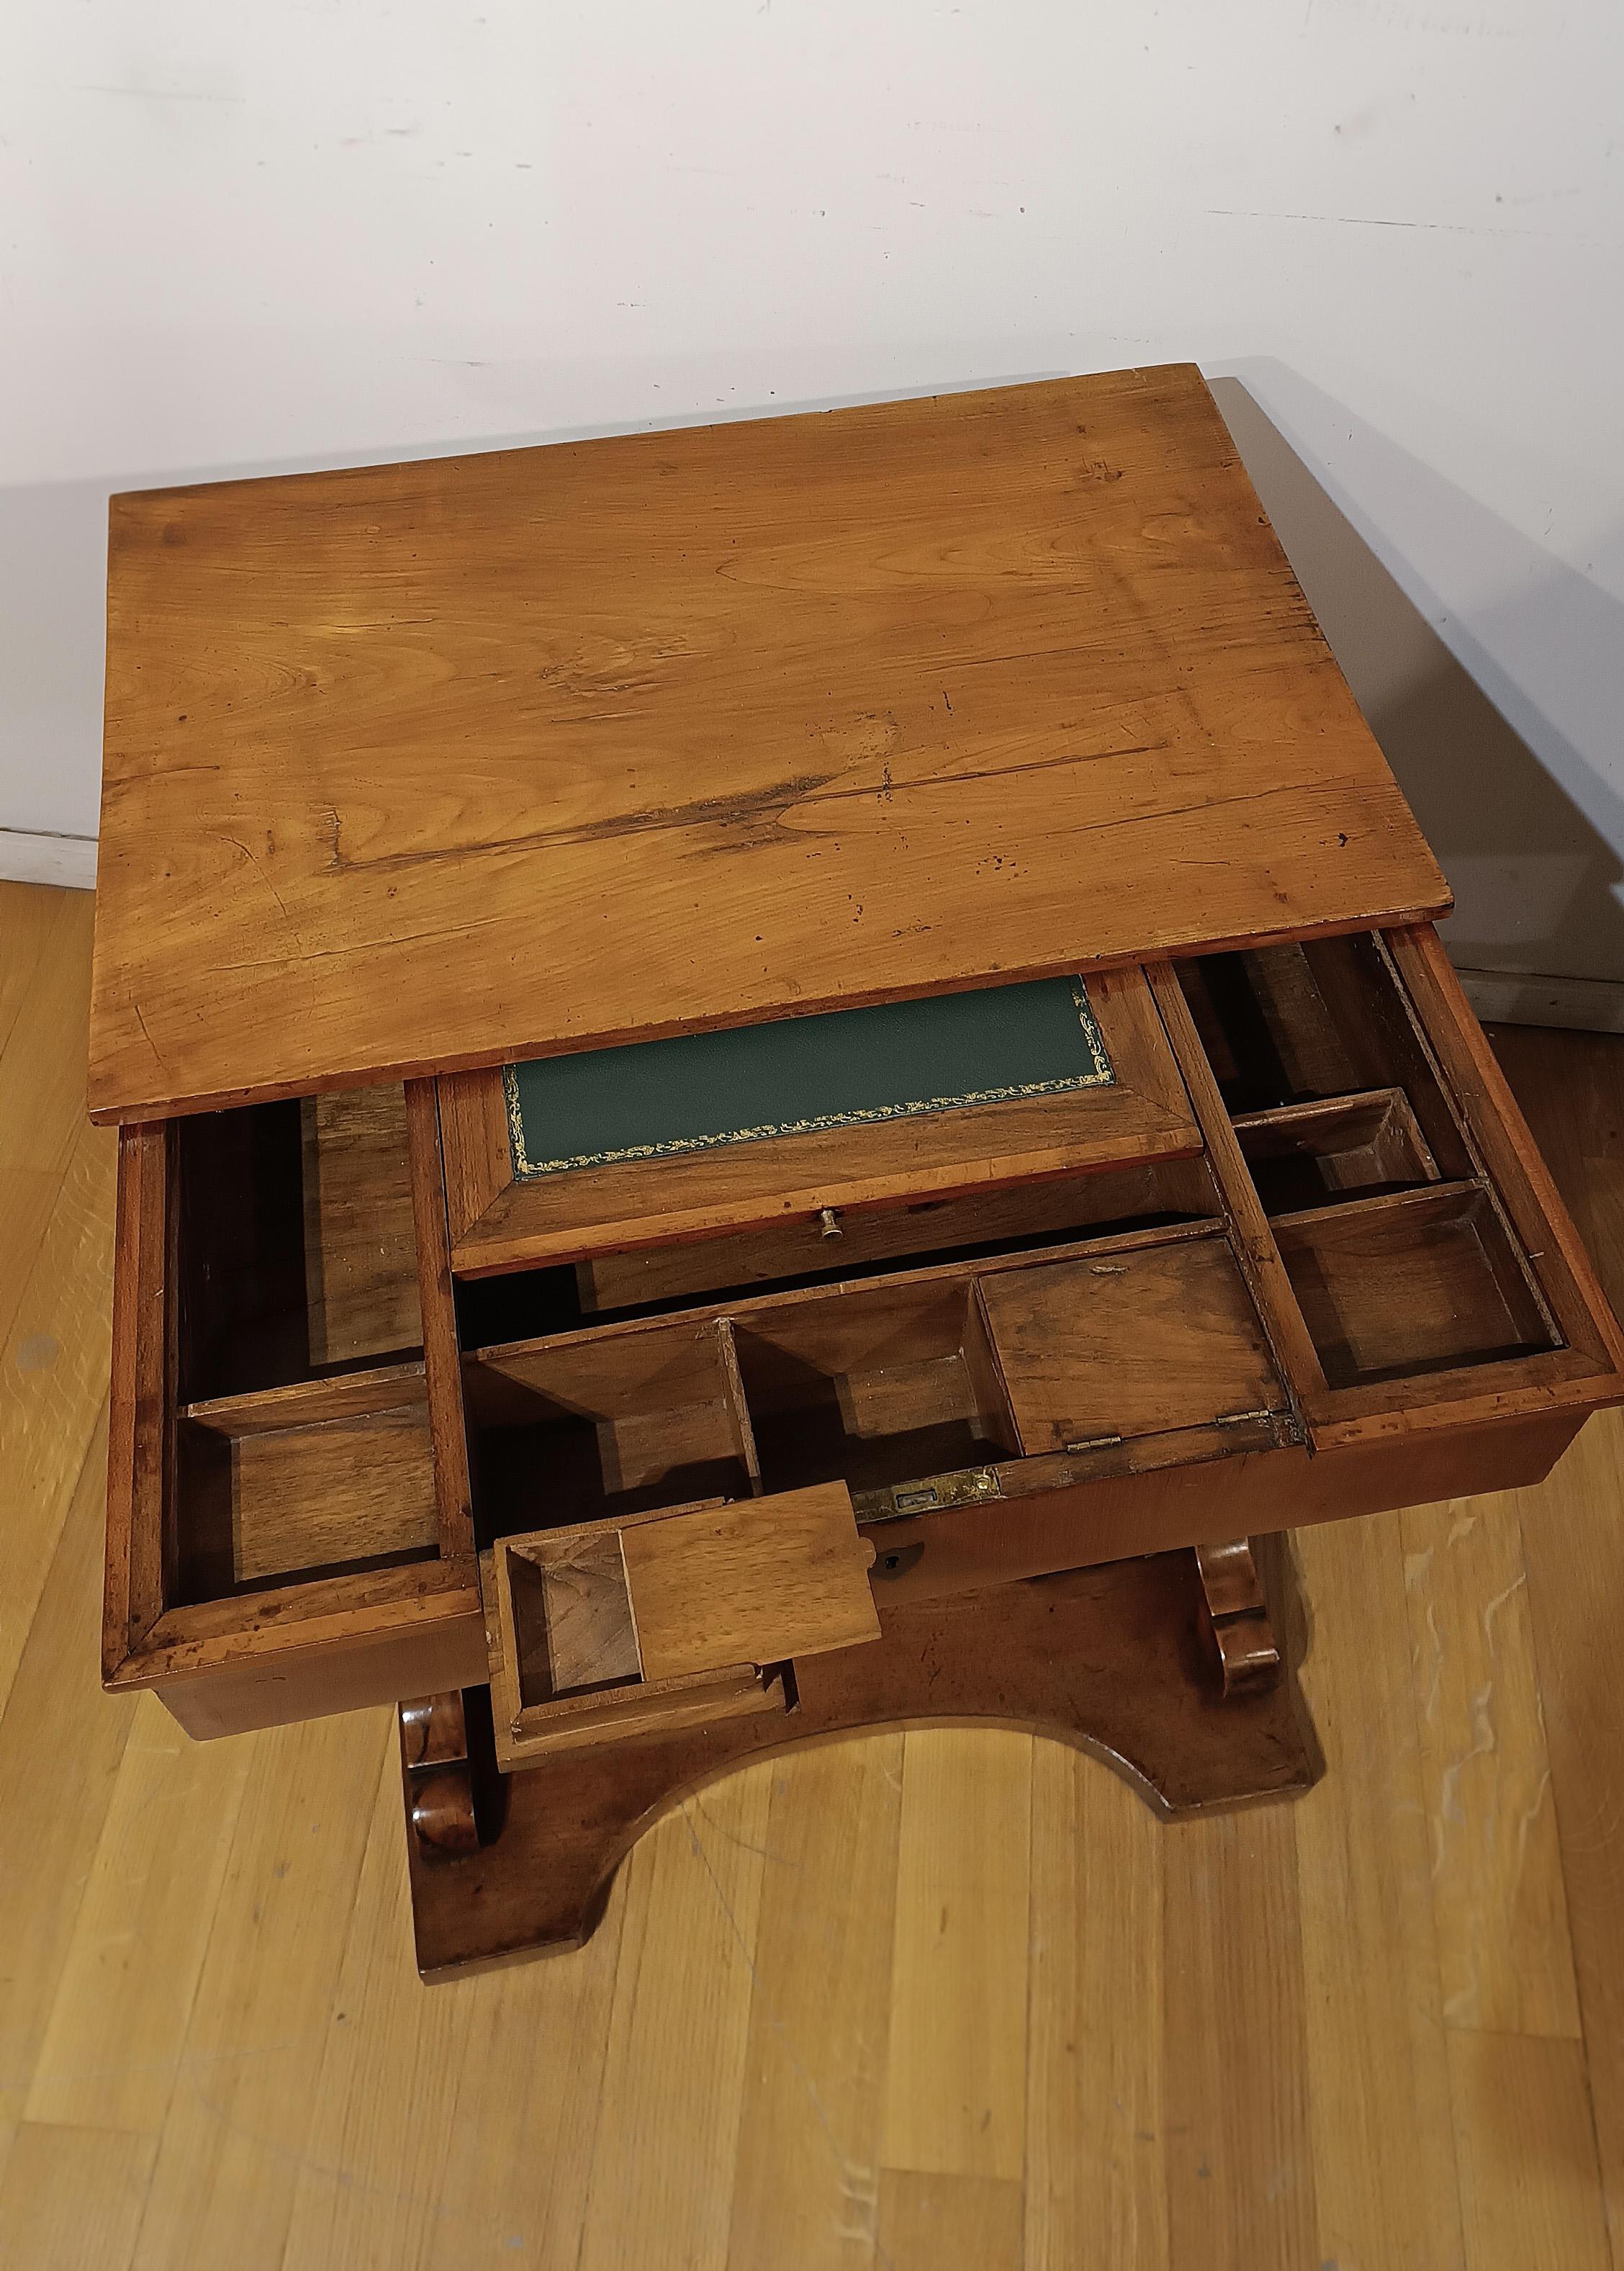 EARLY 19th CENTURY SMALL WORKING TABLE For Sale 2